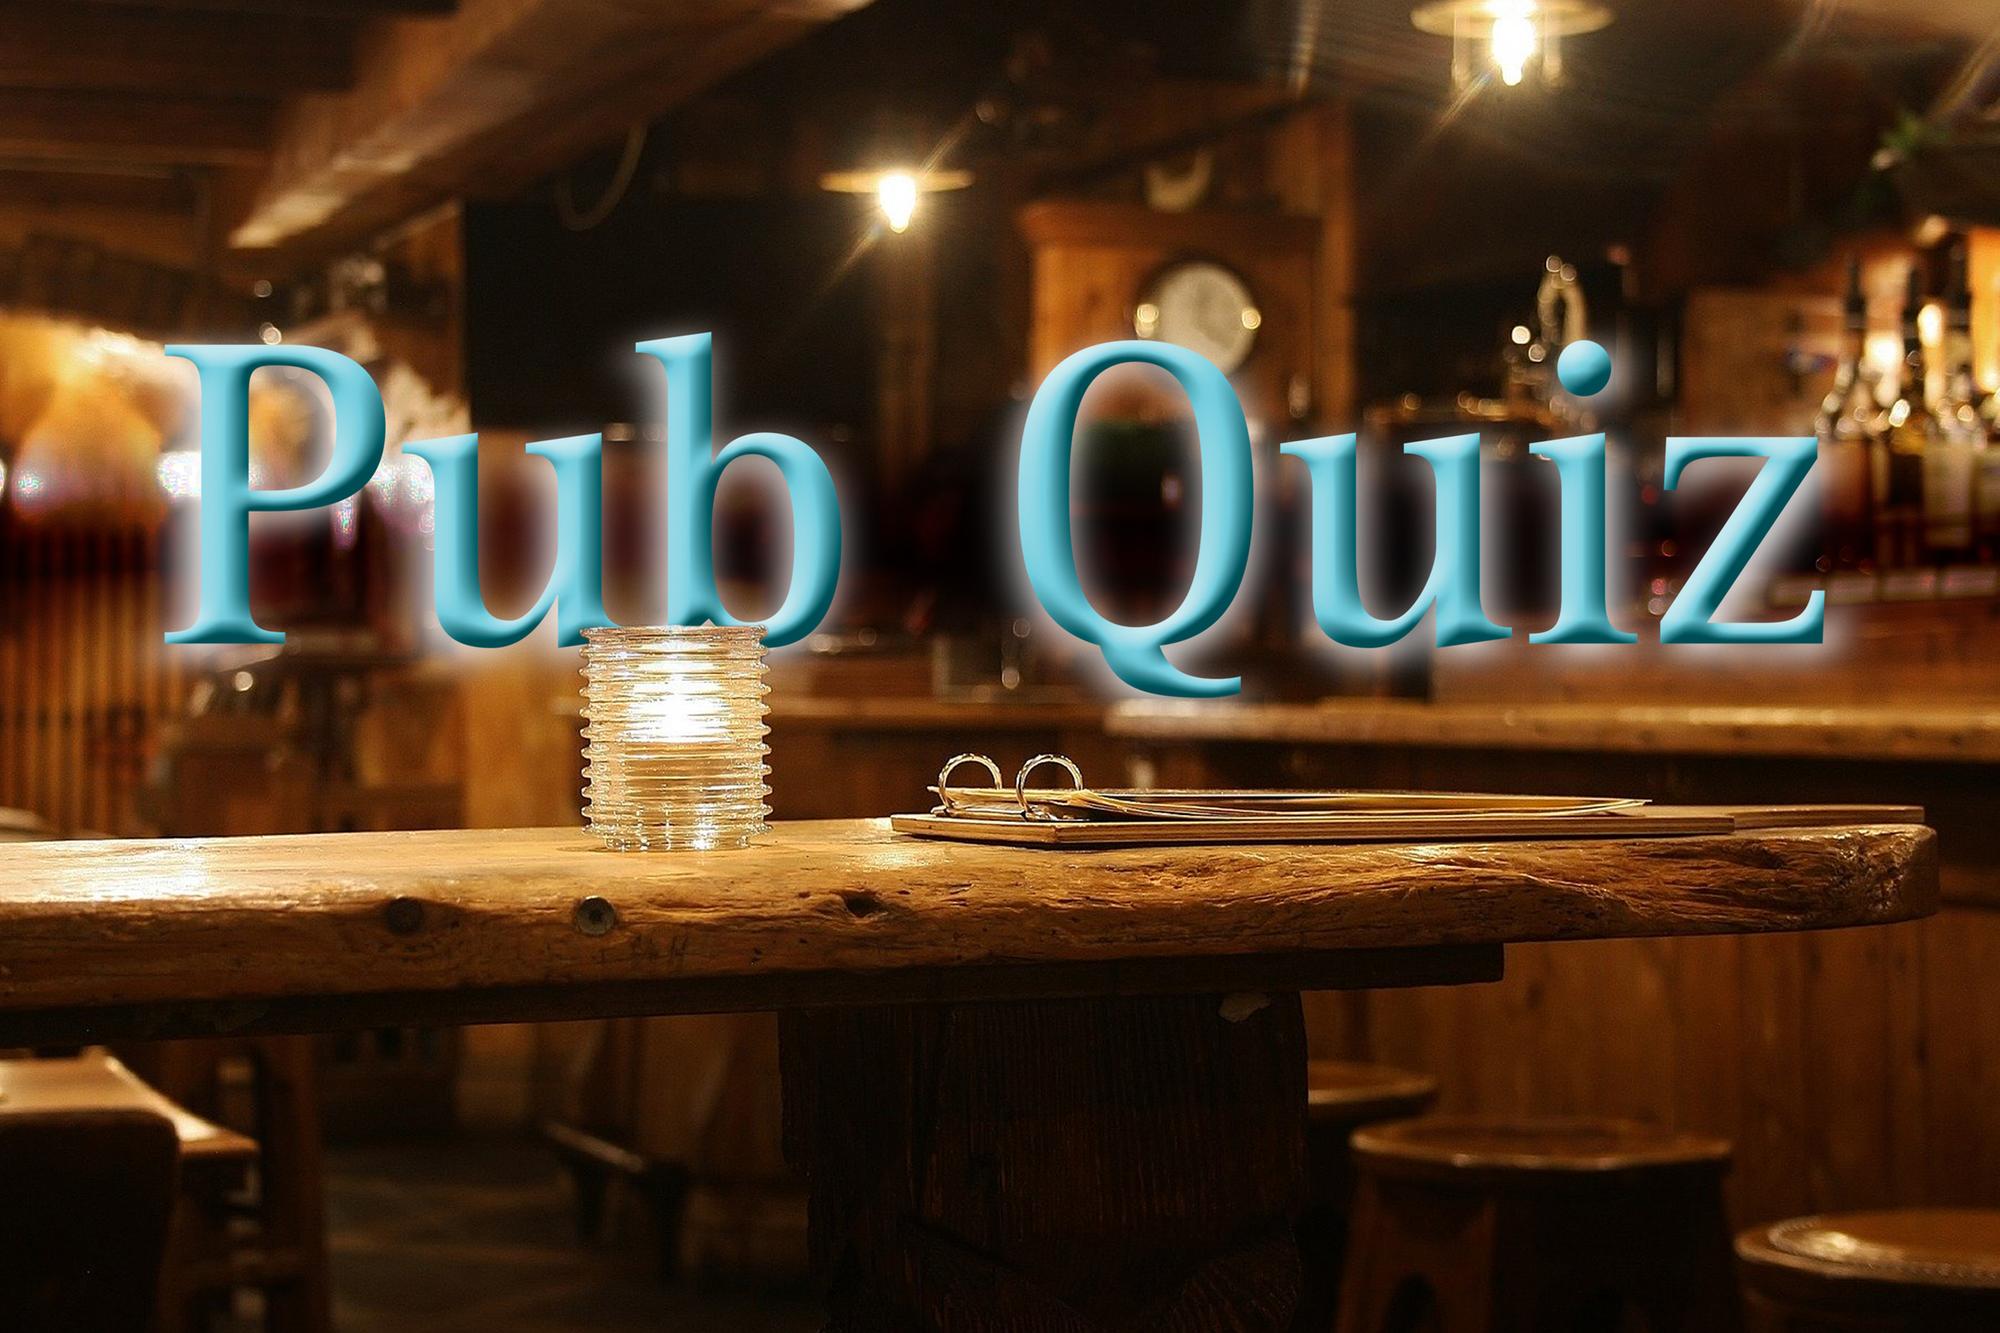 30 pub quiz questions - music, history and general knowledge rounds